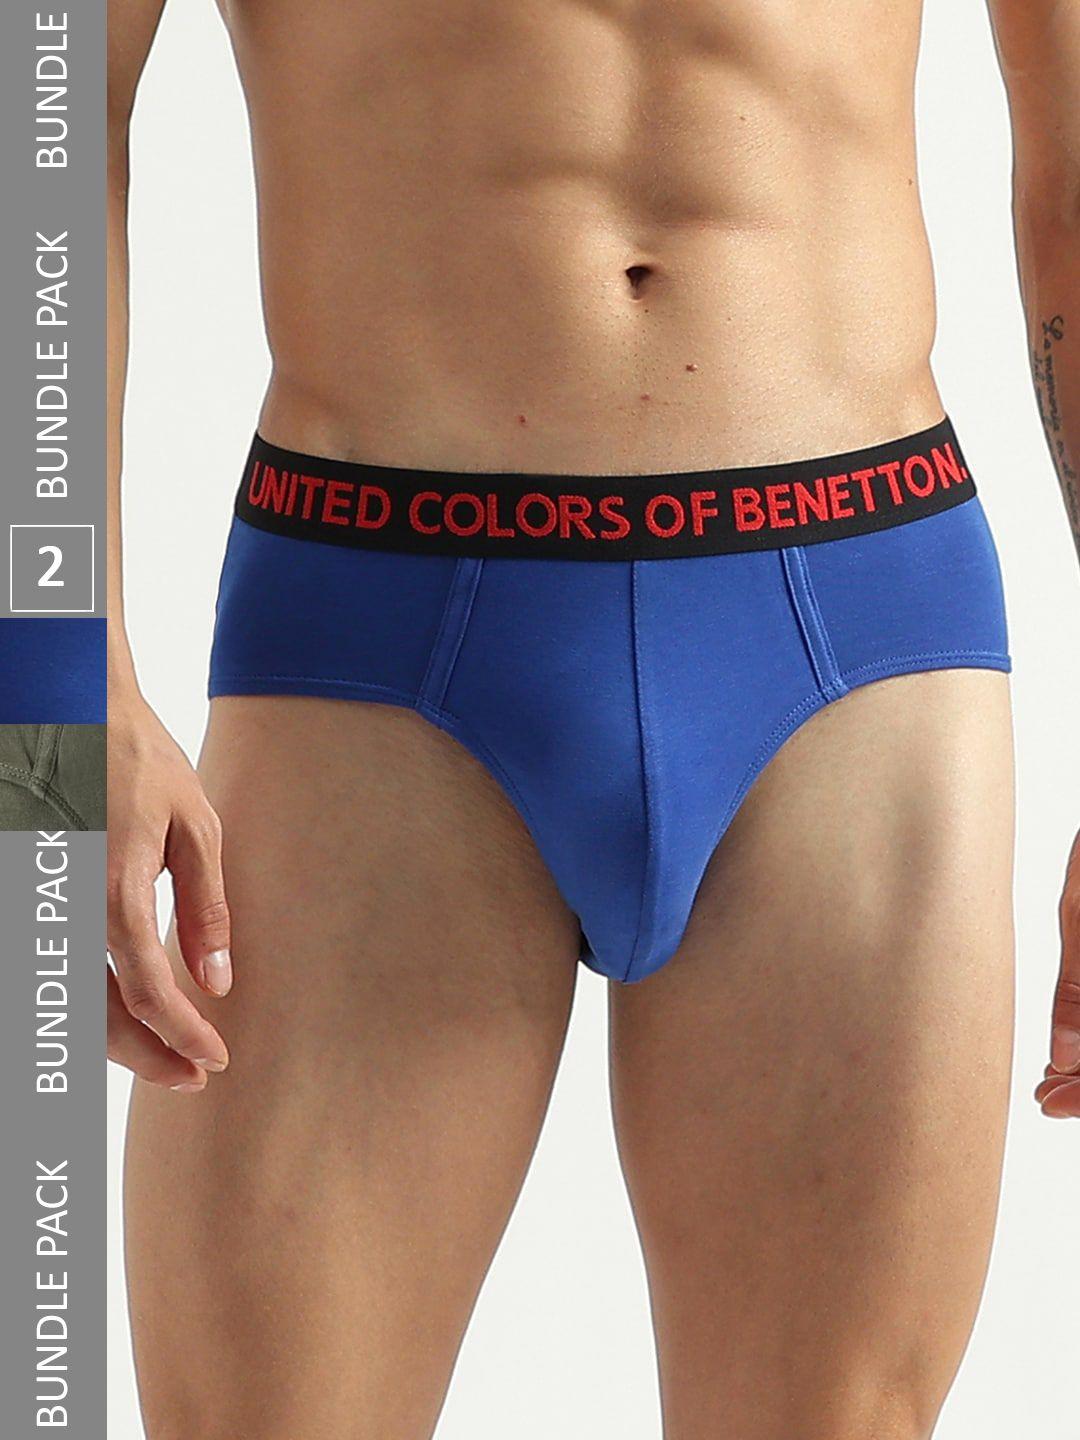 united colors of benetton pack of 2 low rise briefs 23p3menuc141i905xl